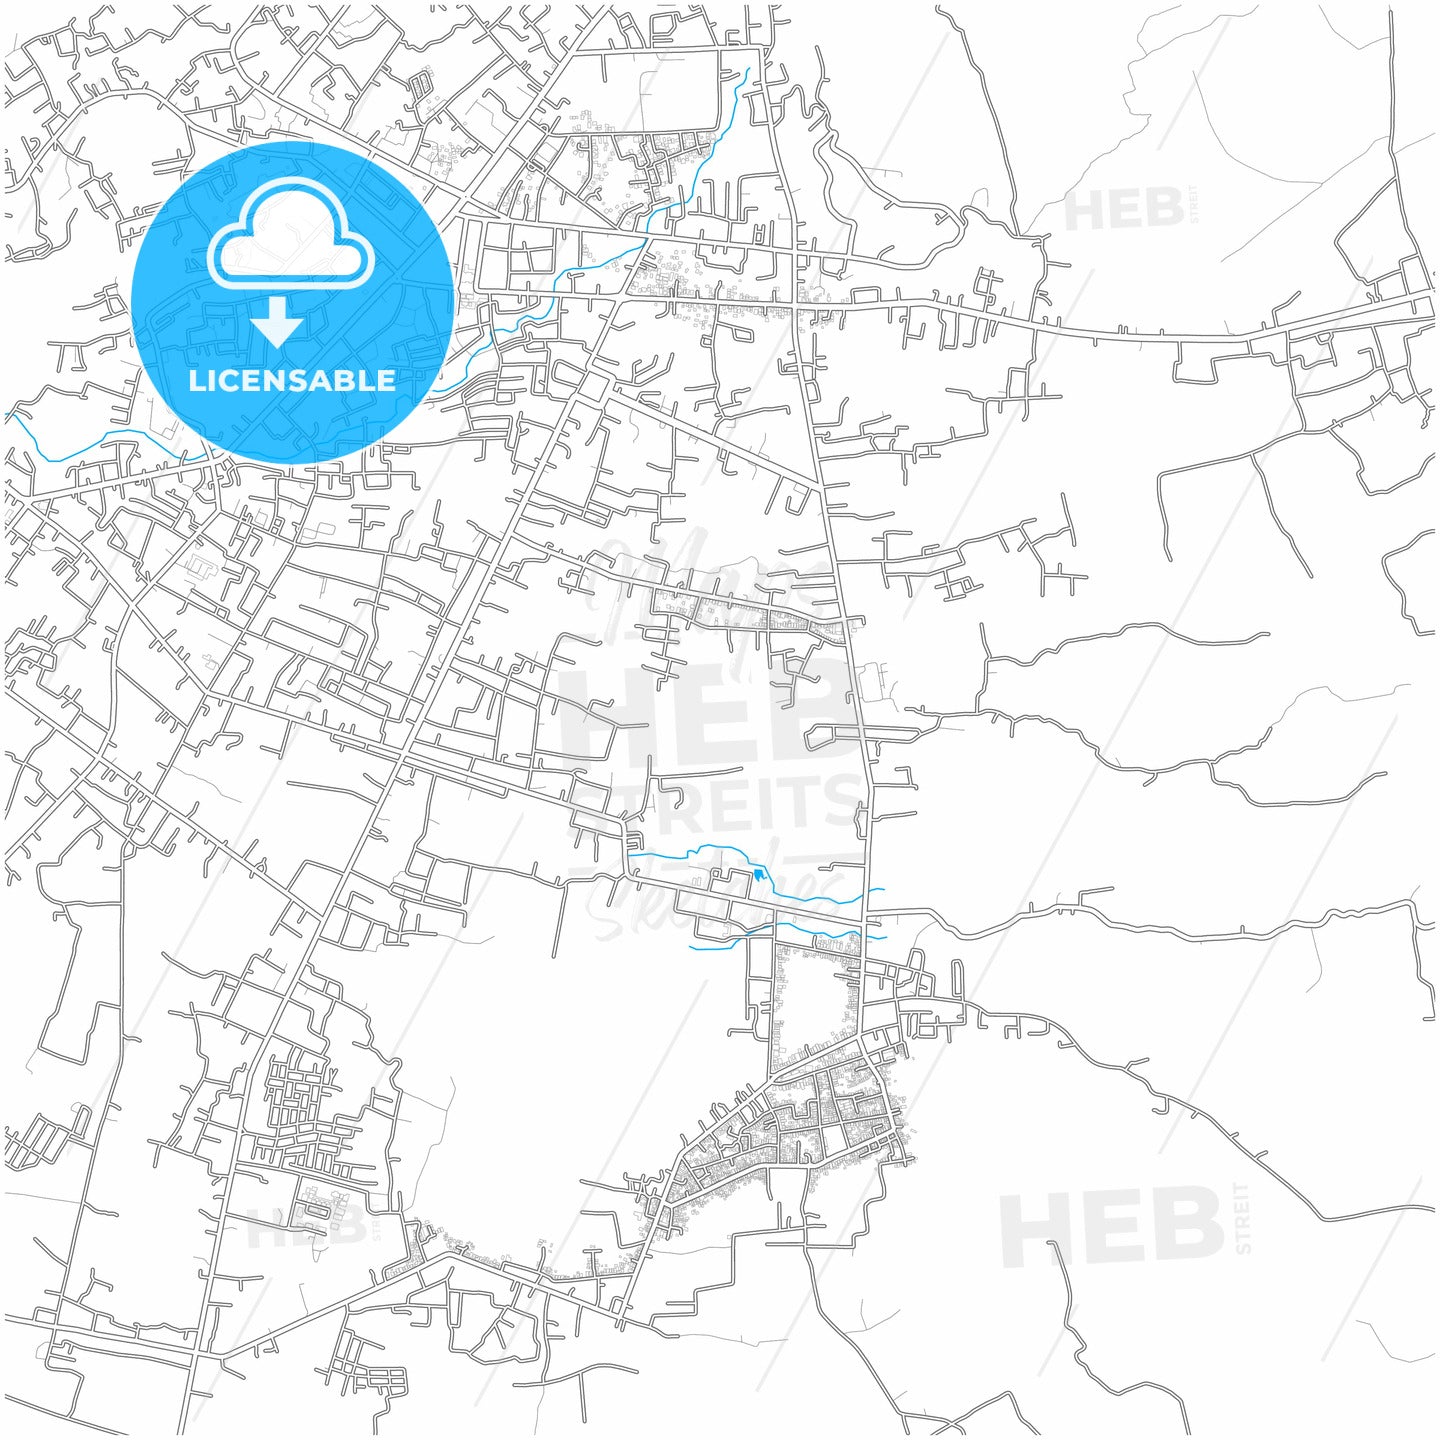 Kotamobagu, North Sulawesi, Indonesia, city map with high quality roads.